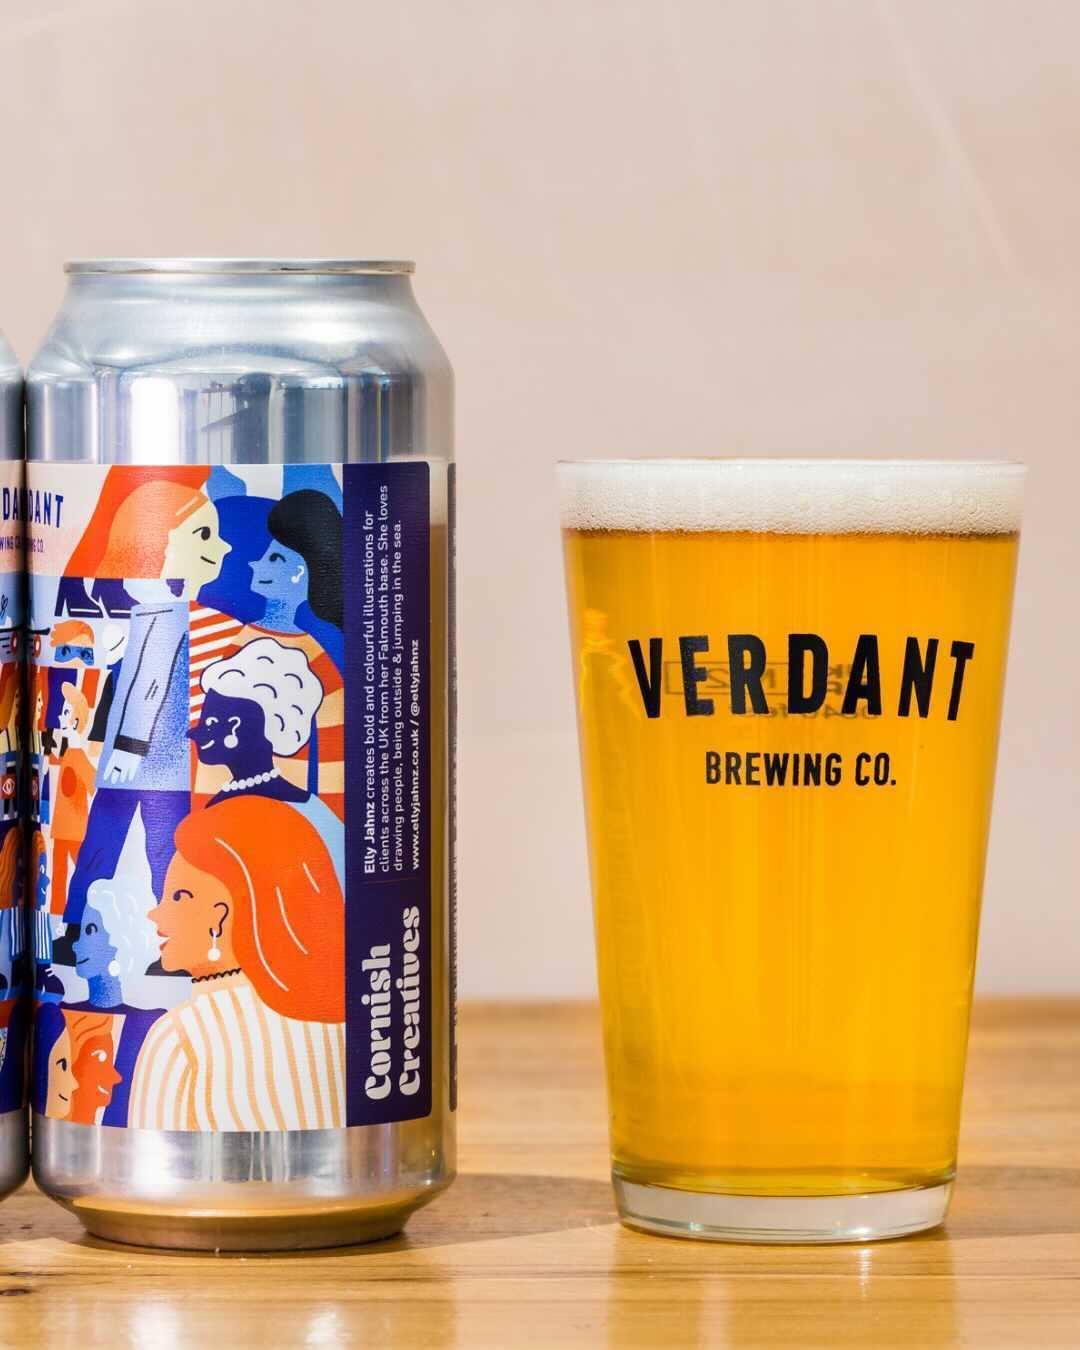 Image supplied by Verdant of their beer next to the illustrated can